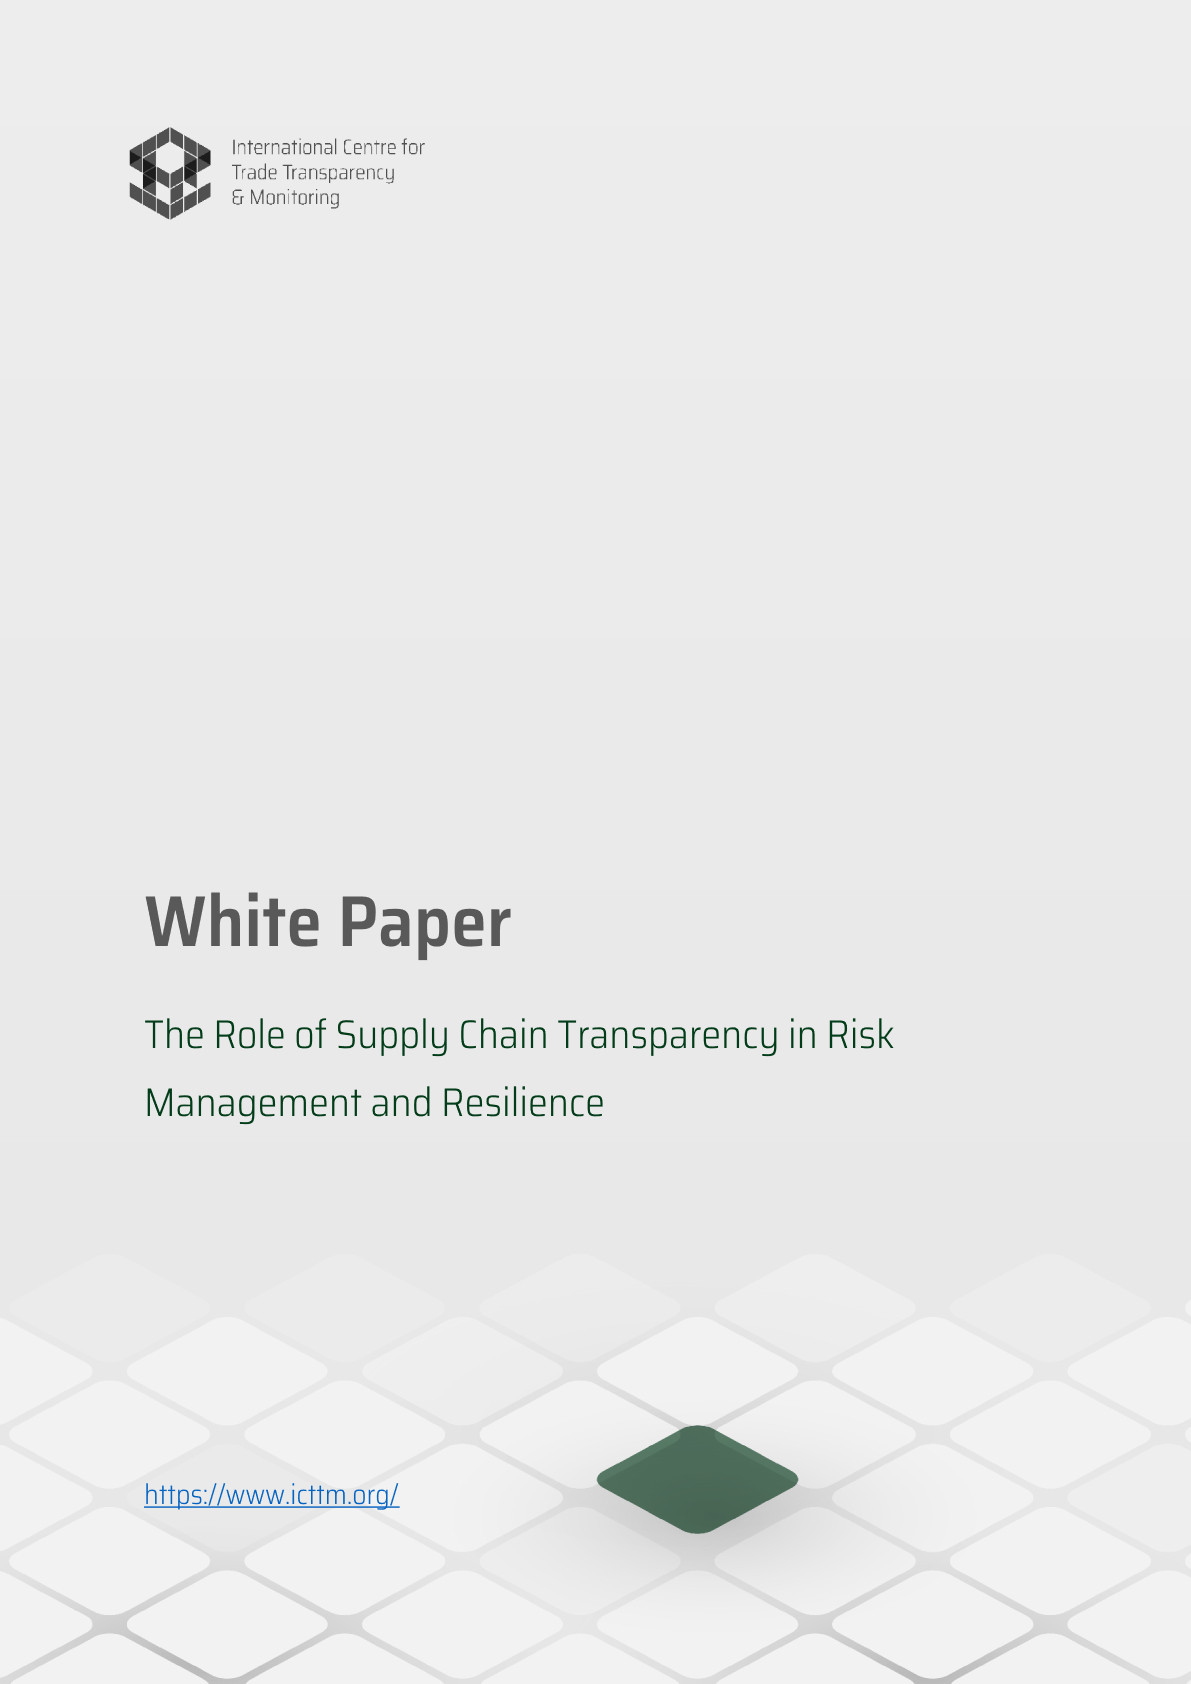 The Role of Supply Chain Transparency in Risk Management and Resilience